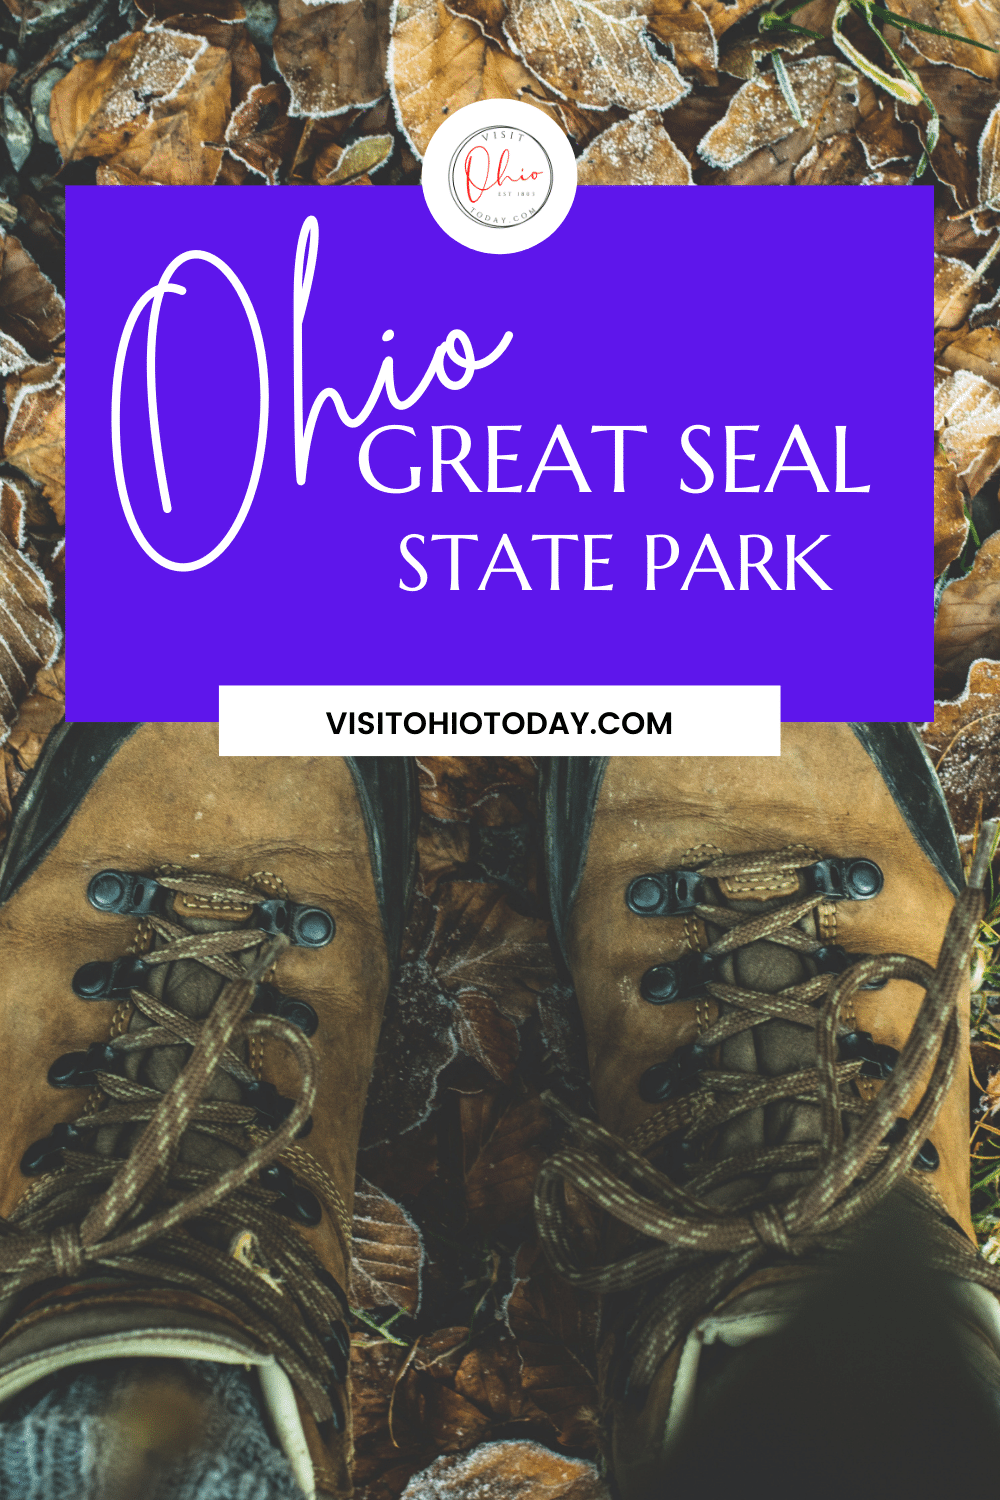 Great Seal State Park is a 1682 acre park located in Southern Ohio. It is filled with beautiful scenery, hiking trails, a campground and more! #statepark #ohio #ohiopark #hiking #greatsealstatepark